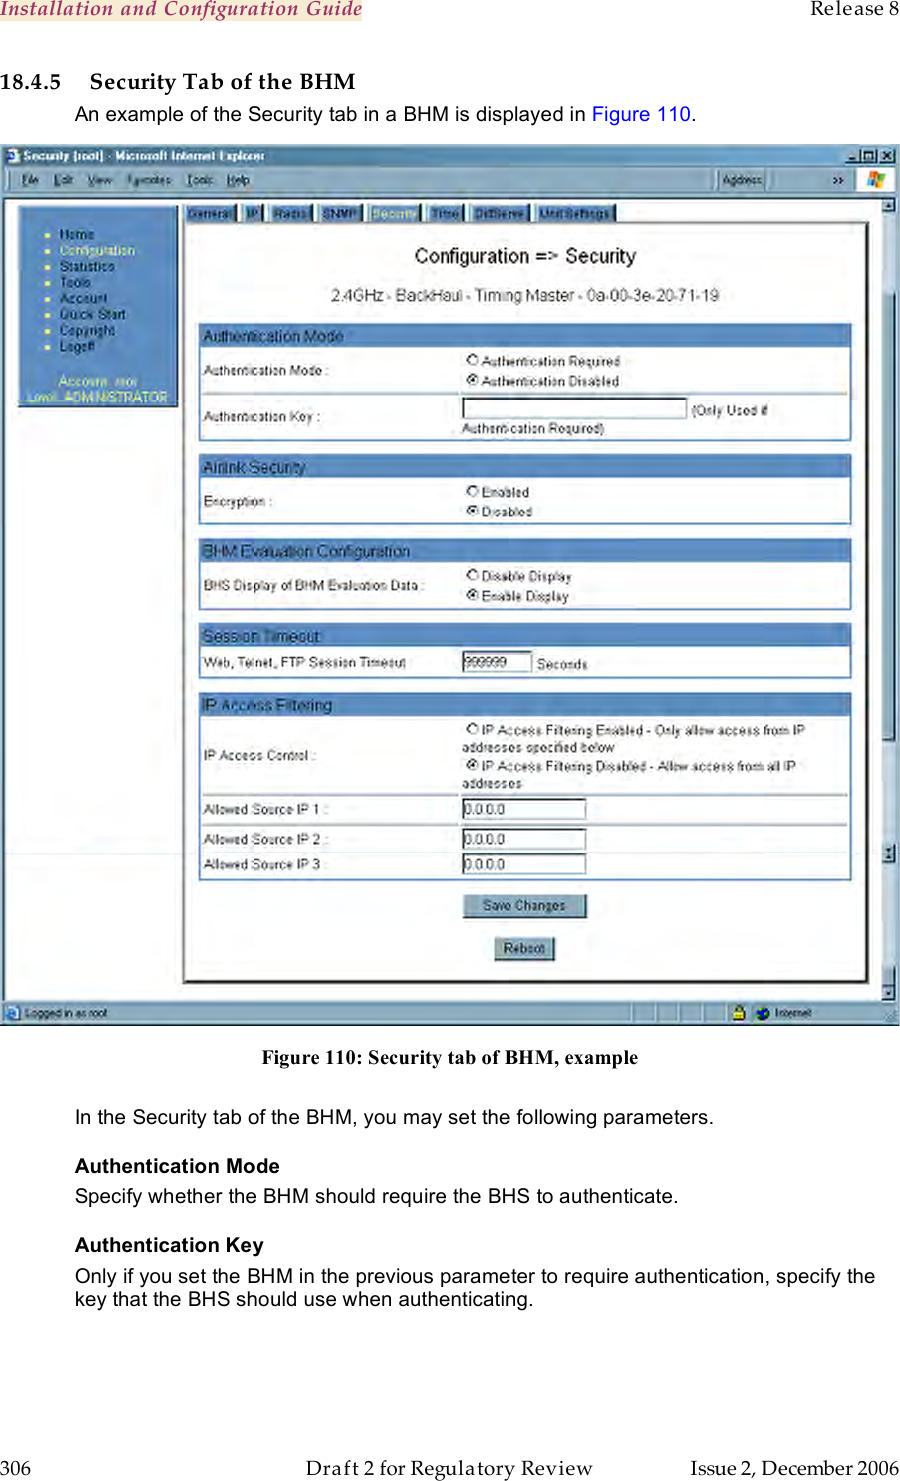 Installation and Configuration Guide    Release 8   306  Draft 2 for Regulatory Review  Issue 2, December 2006 18.4.5 Security Tab of the BHM An example of the Security tab in a BHM is displayed in Figure 110.  Figure 110: Security tab of BHM, example  In the Security tab of the BHM, you may set the following parameters. Authentication Mode Specify whether the BHM should require the BHS to authenticate. Authentication Key Only if you set the BHM in the previous parameter to require authentication, specify the key that the BHS should use when authenticating.  